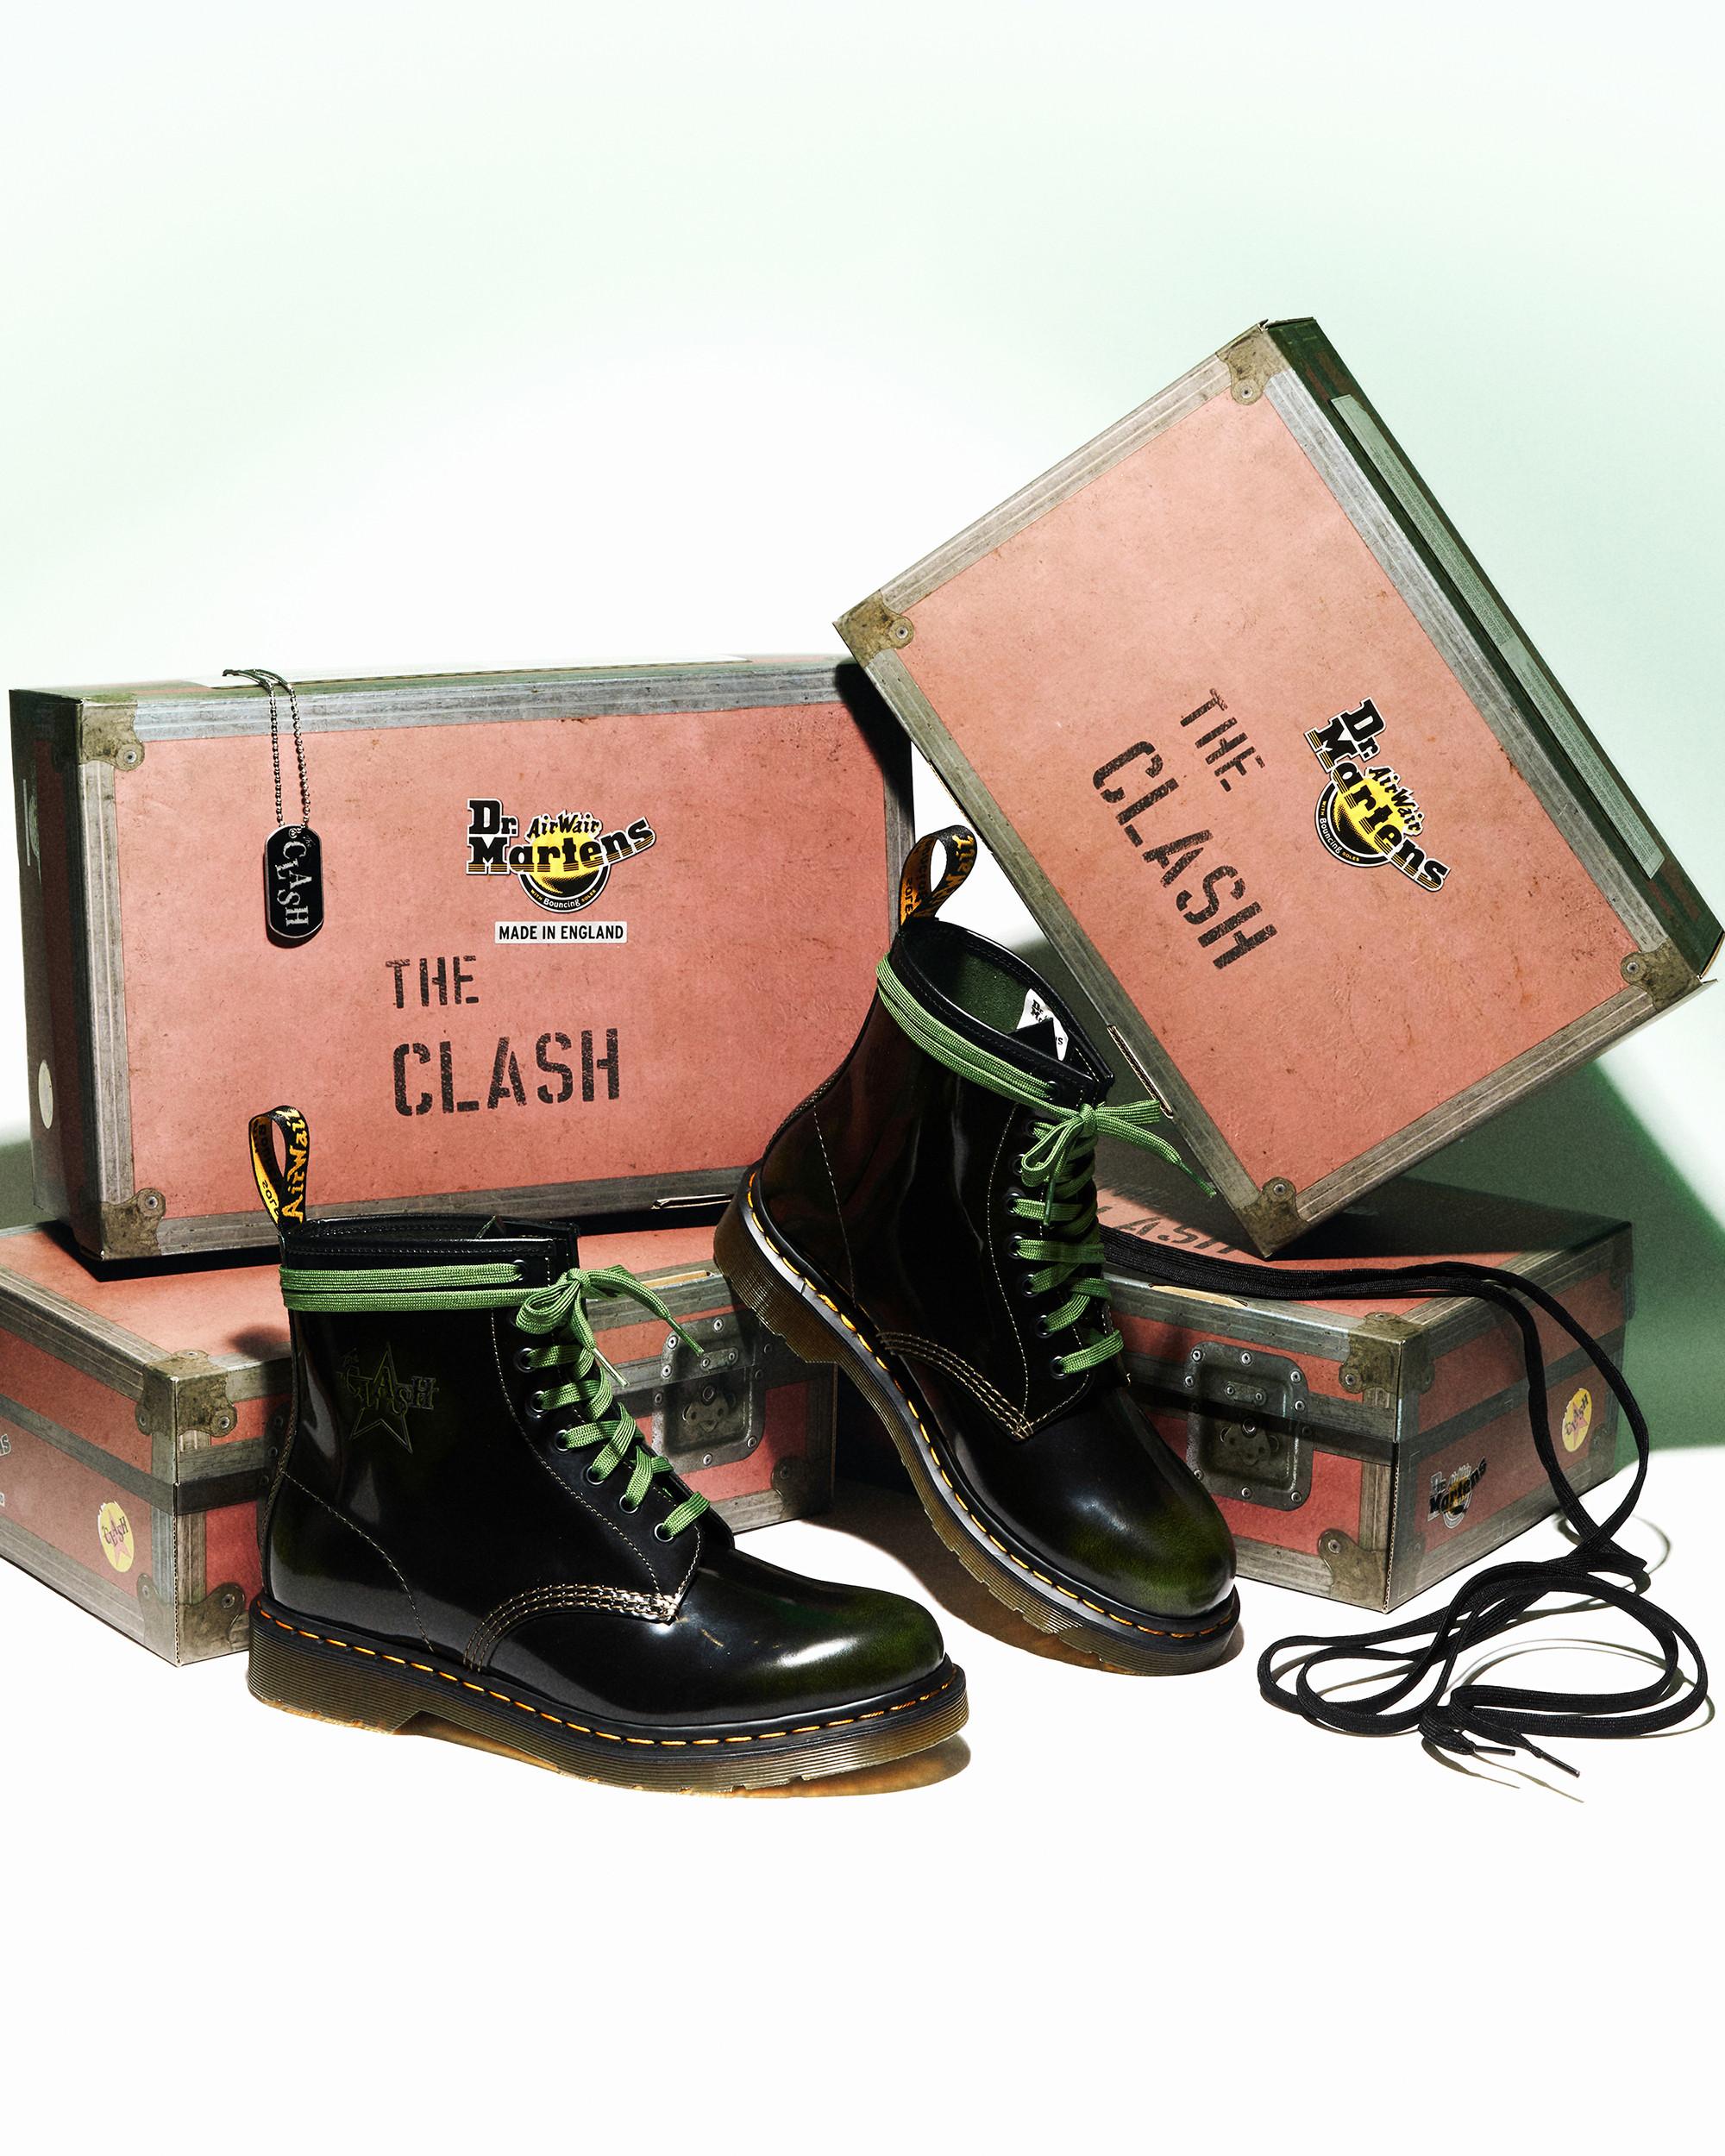 DR MARTENS 1460 THE CLASH Arcadia Leather Boots